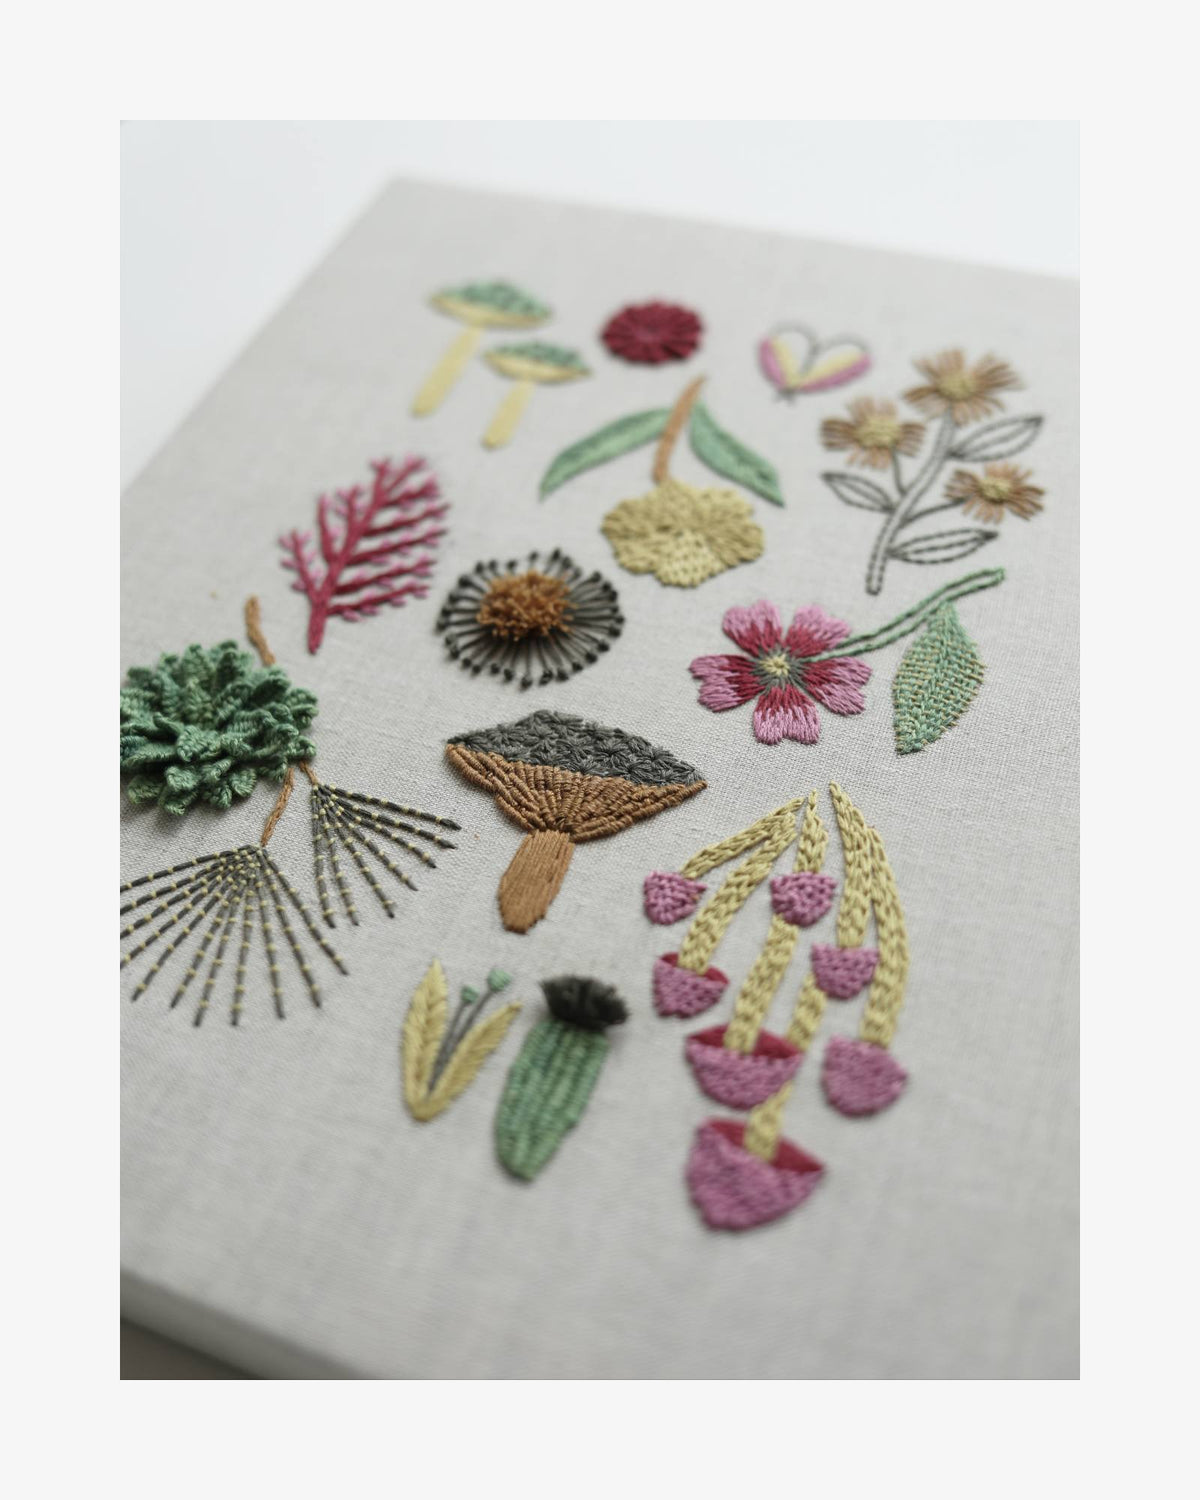 Botanical Embroidery Class